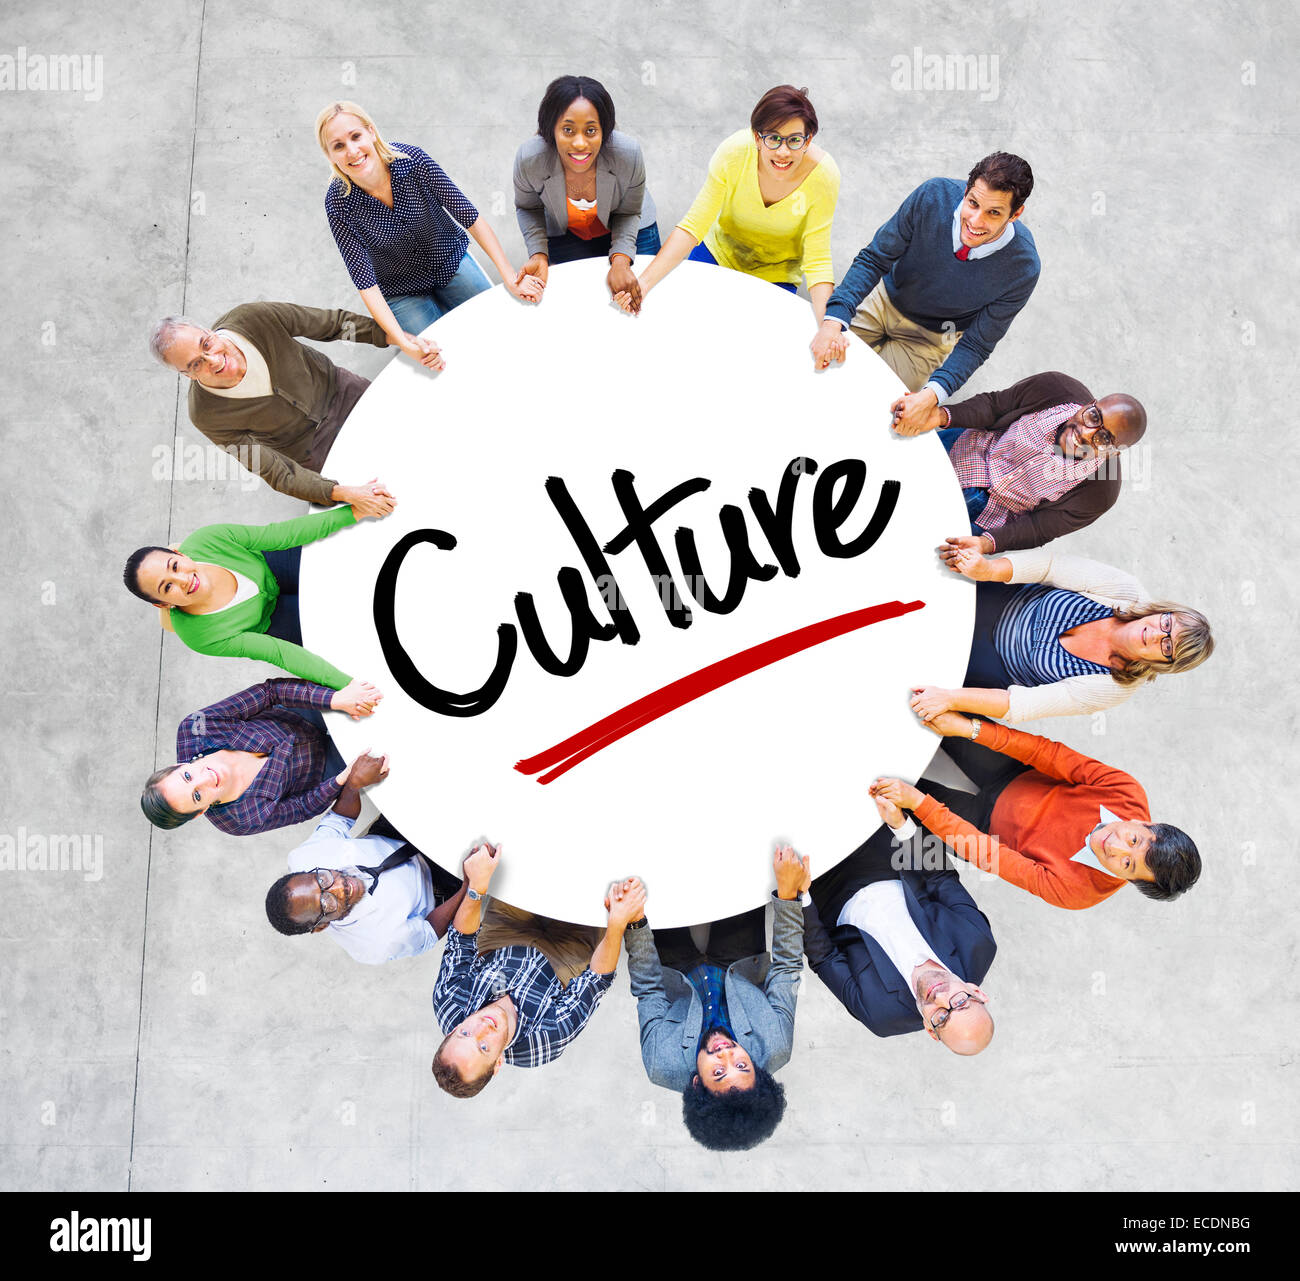 Diverse People in a Circle with Culture Concept Stock Photo